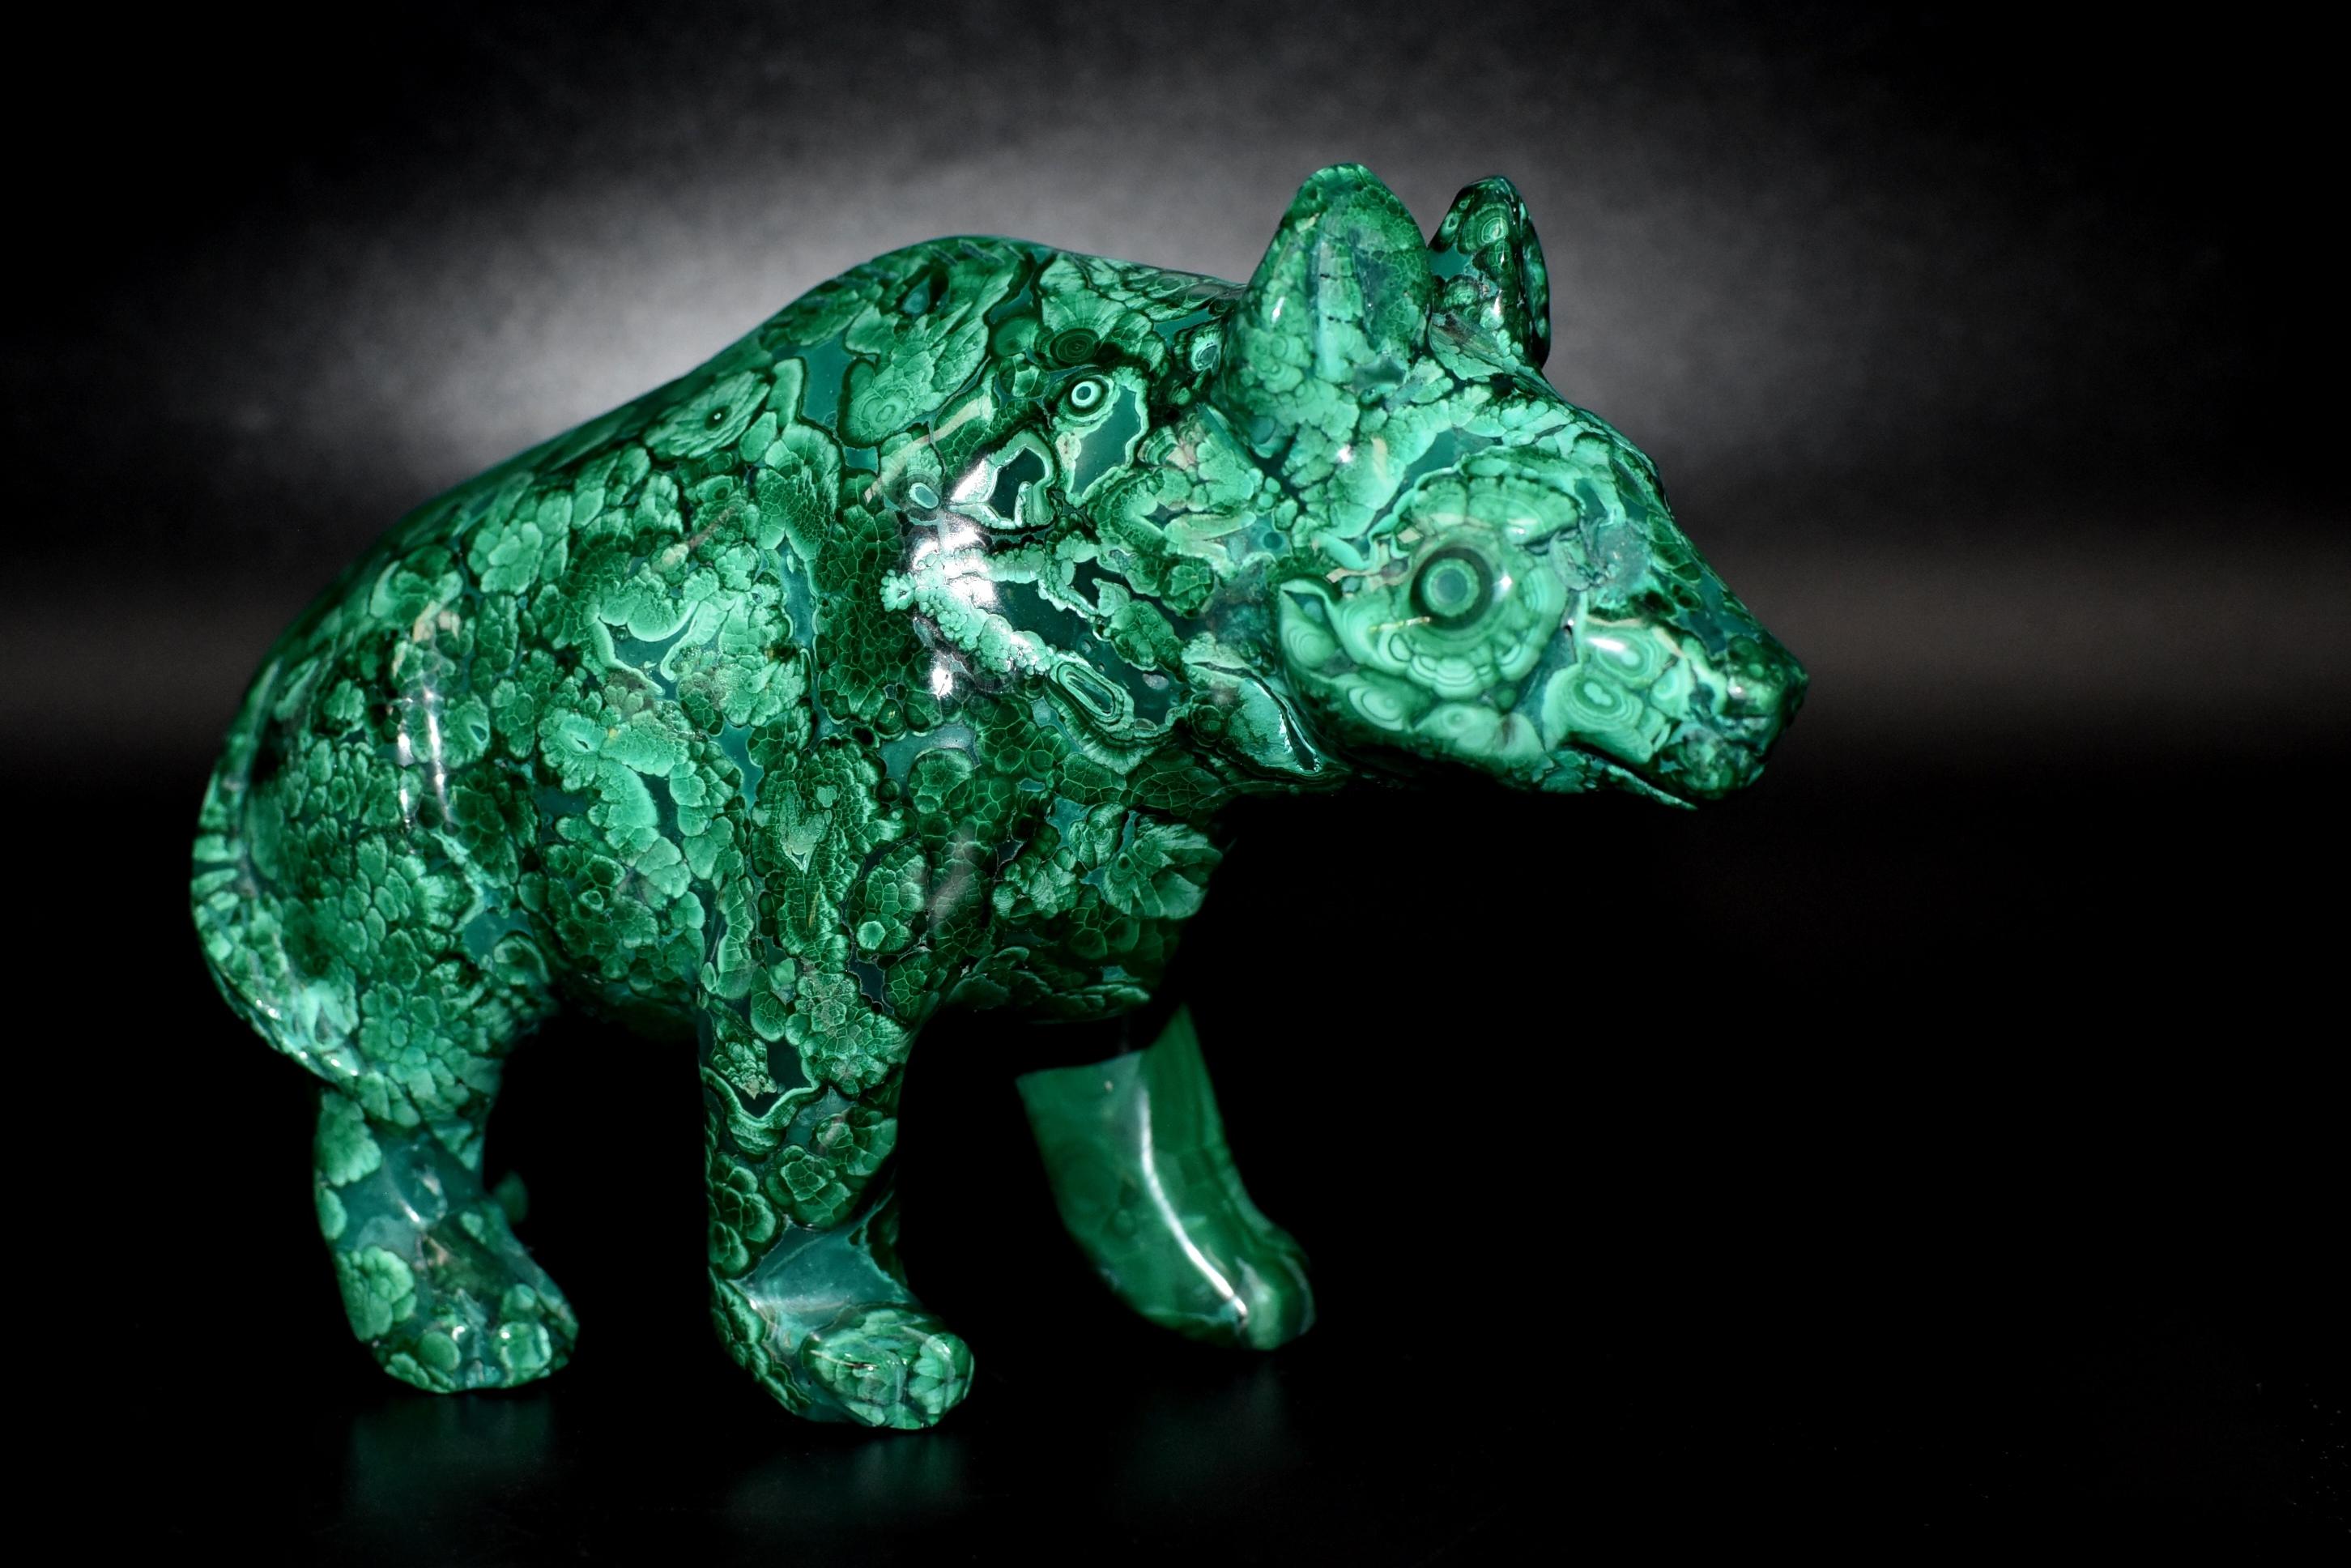 A wonderful 2 lb bear sculpture in the most spectacular natural malachite. The bear is depicted in walking motion. His eyes were perfect circles that were natural to the stone. All natural with splendid swirls and patterns, this remarkable pieces is